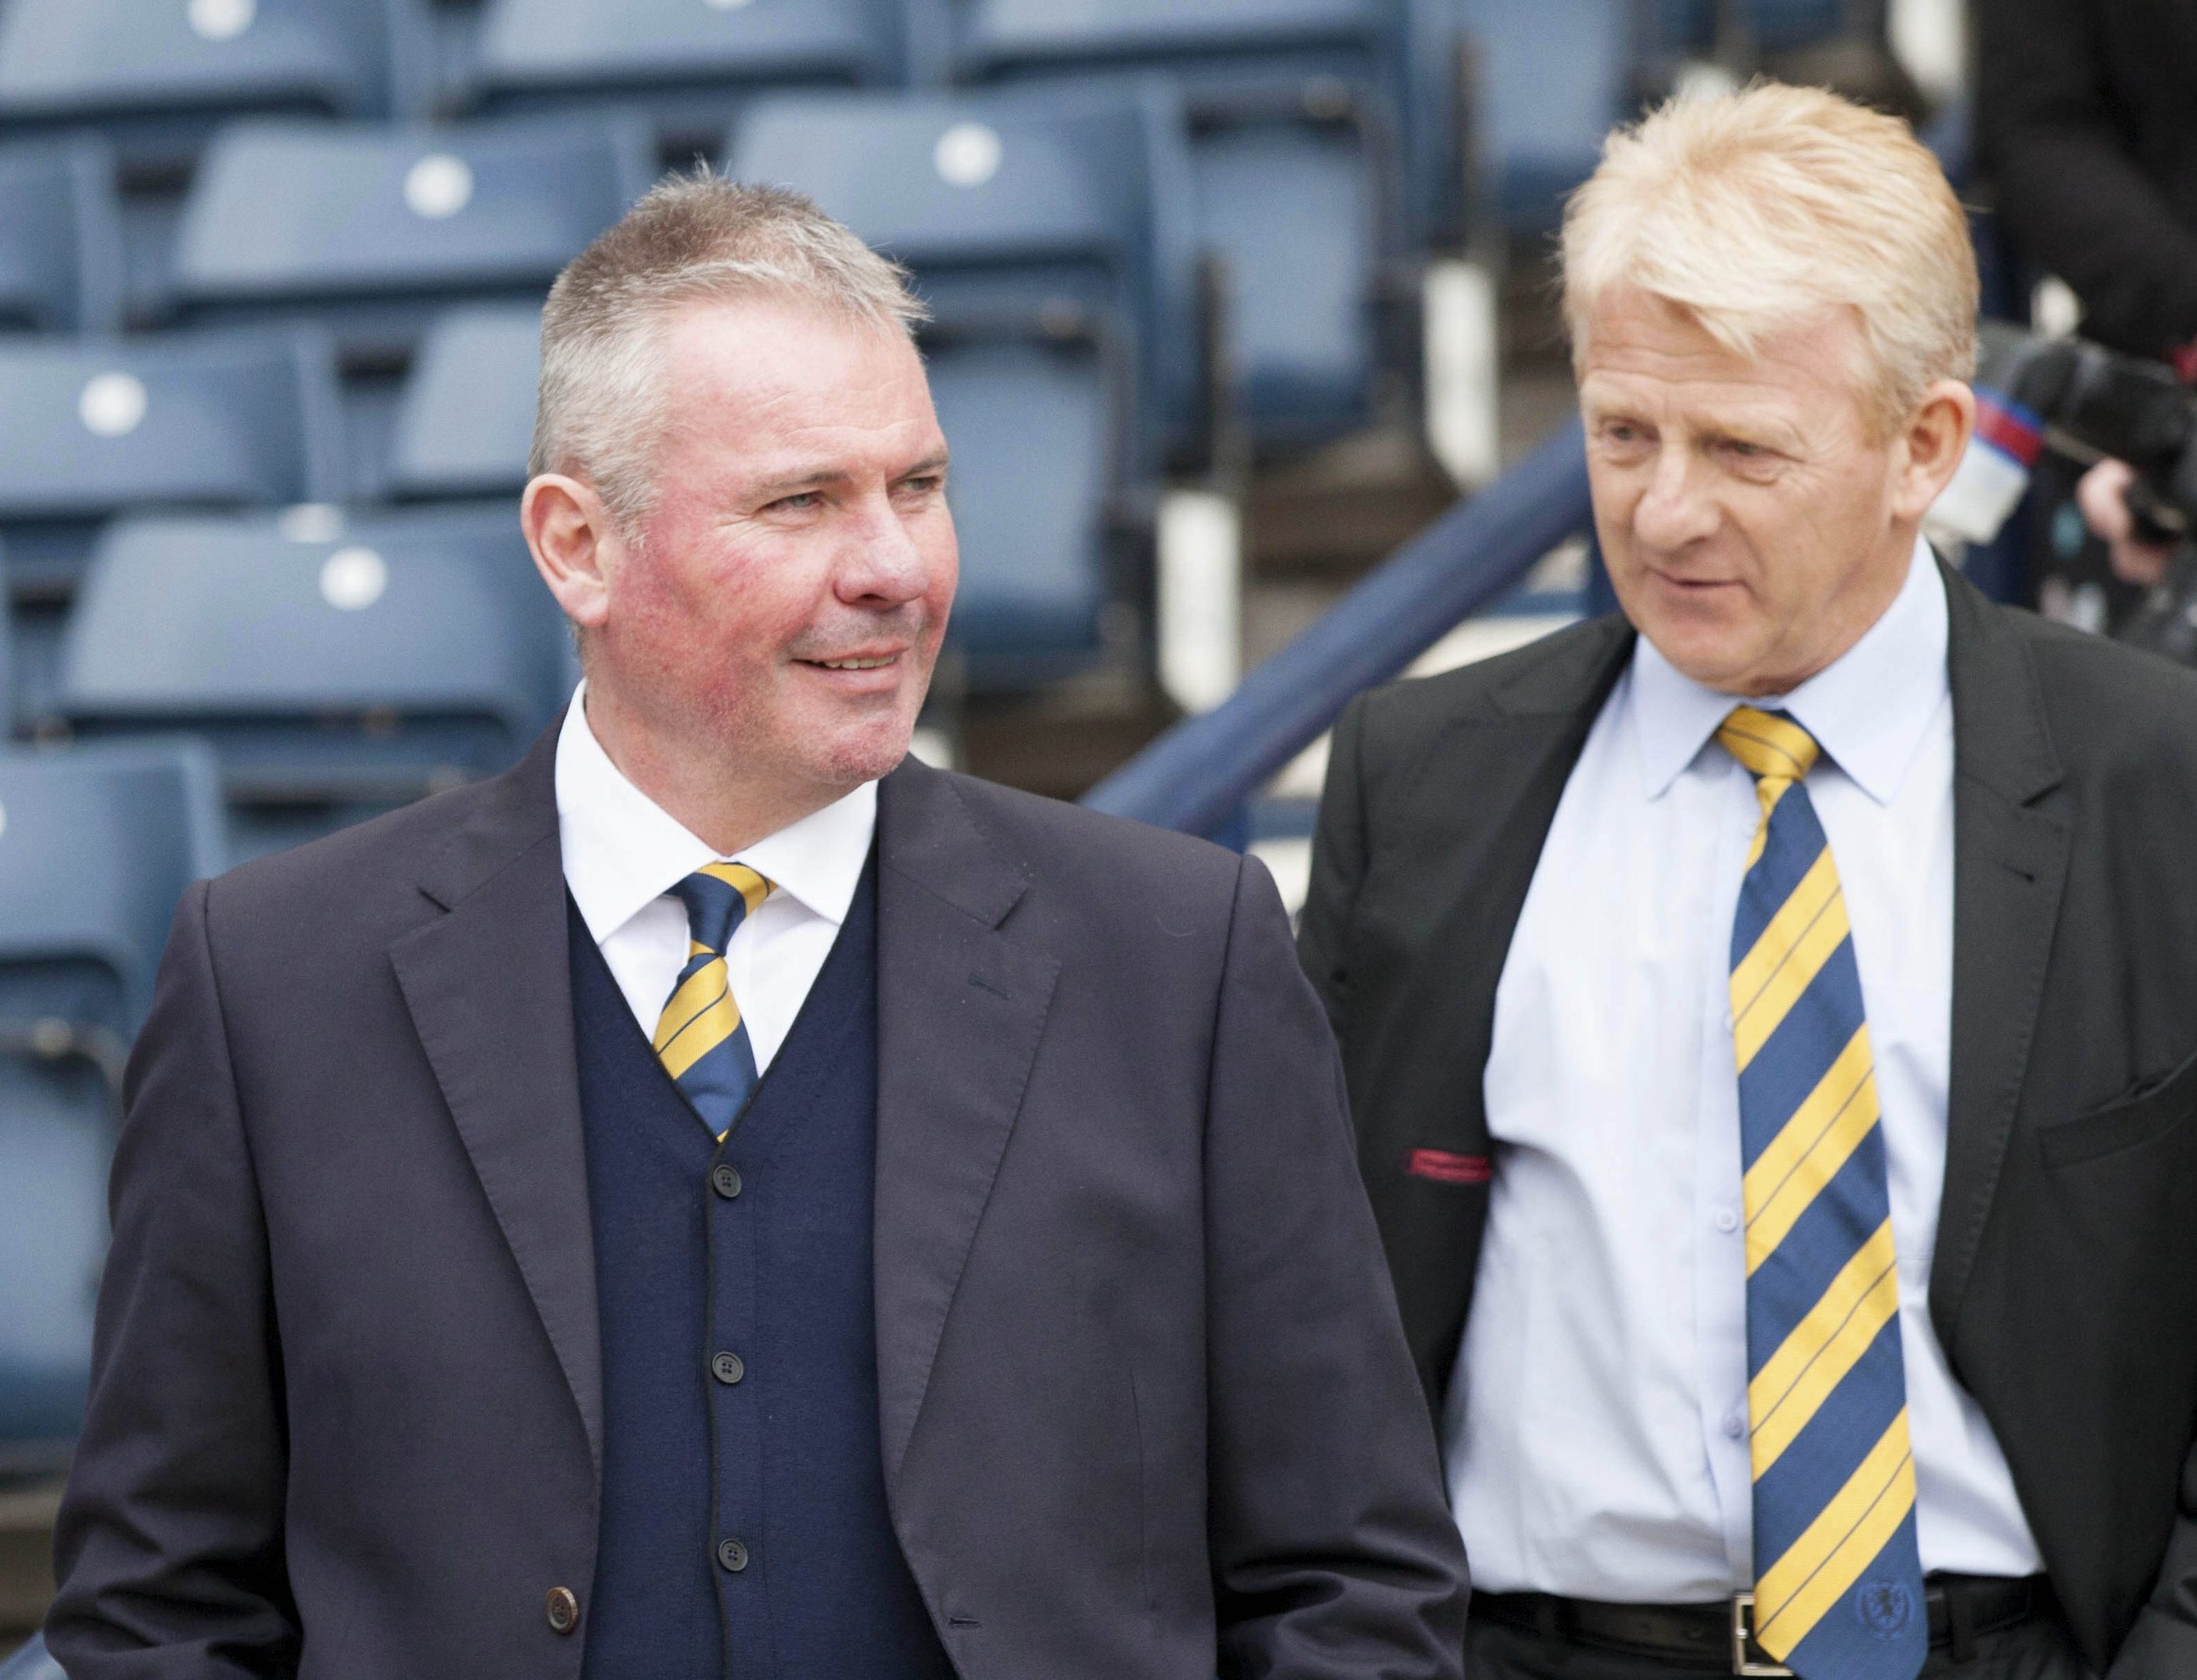 Brian McClair and Gordon Strachan could both be needing replaced in the near future.